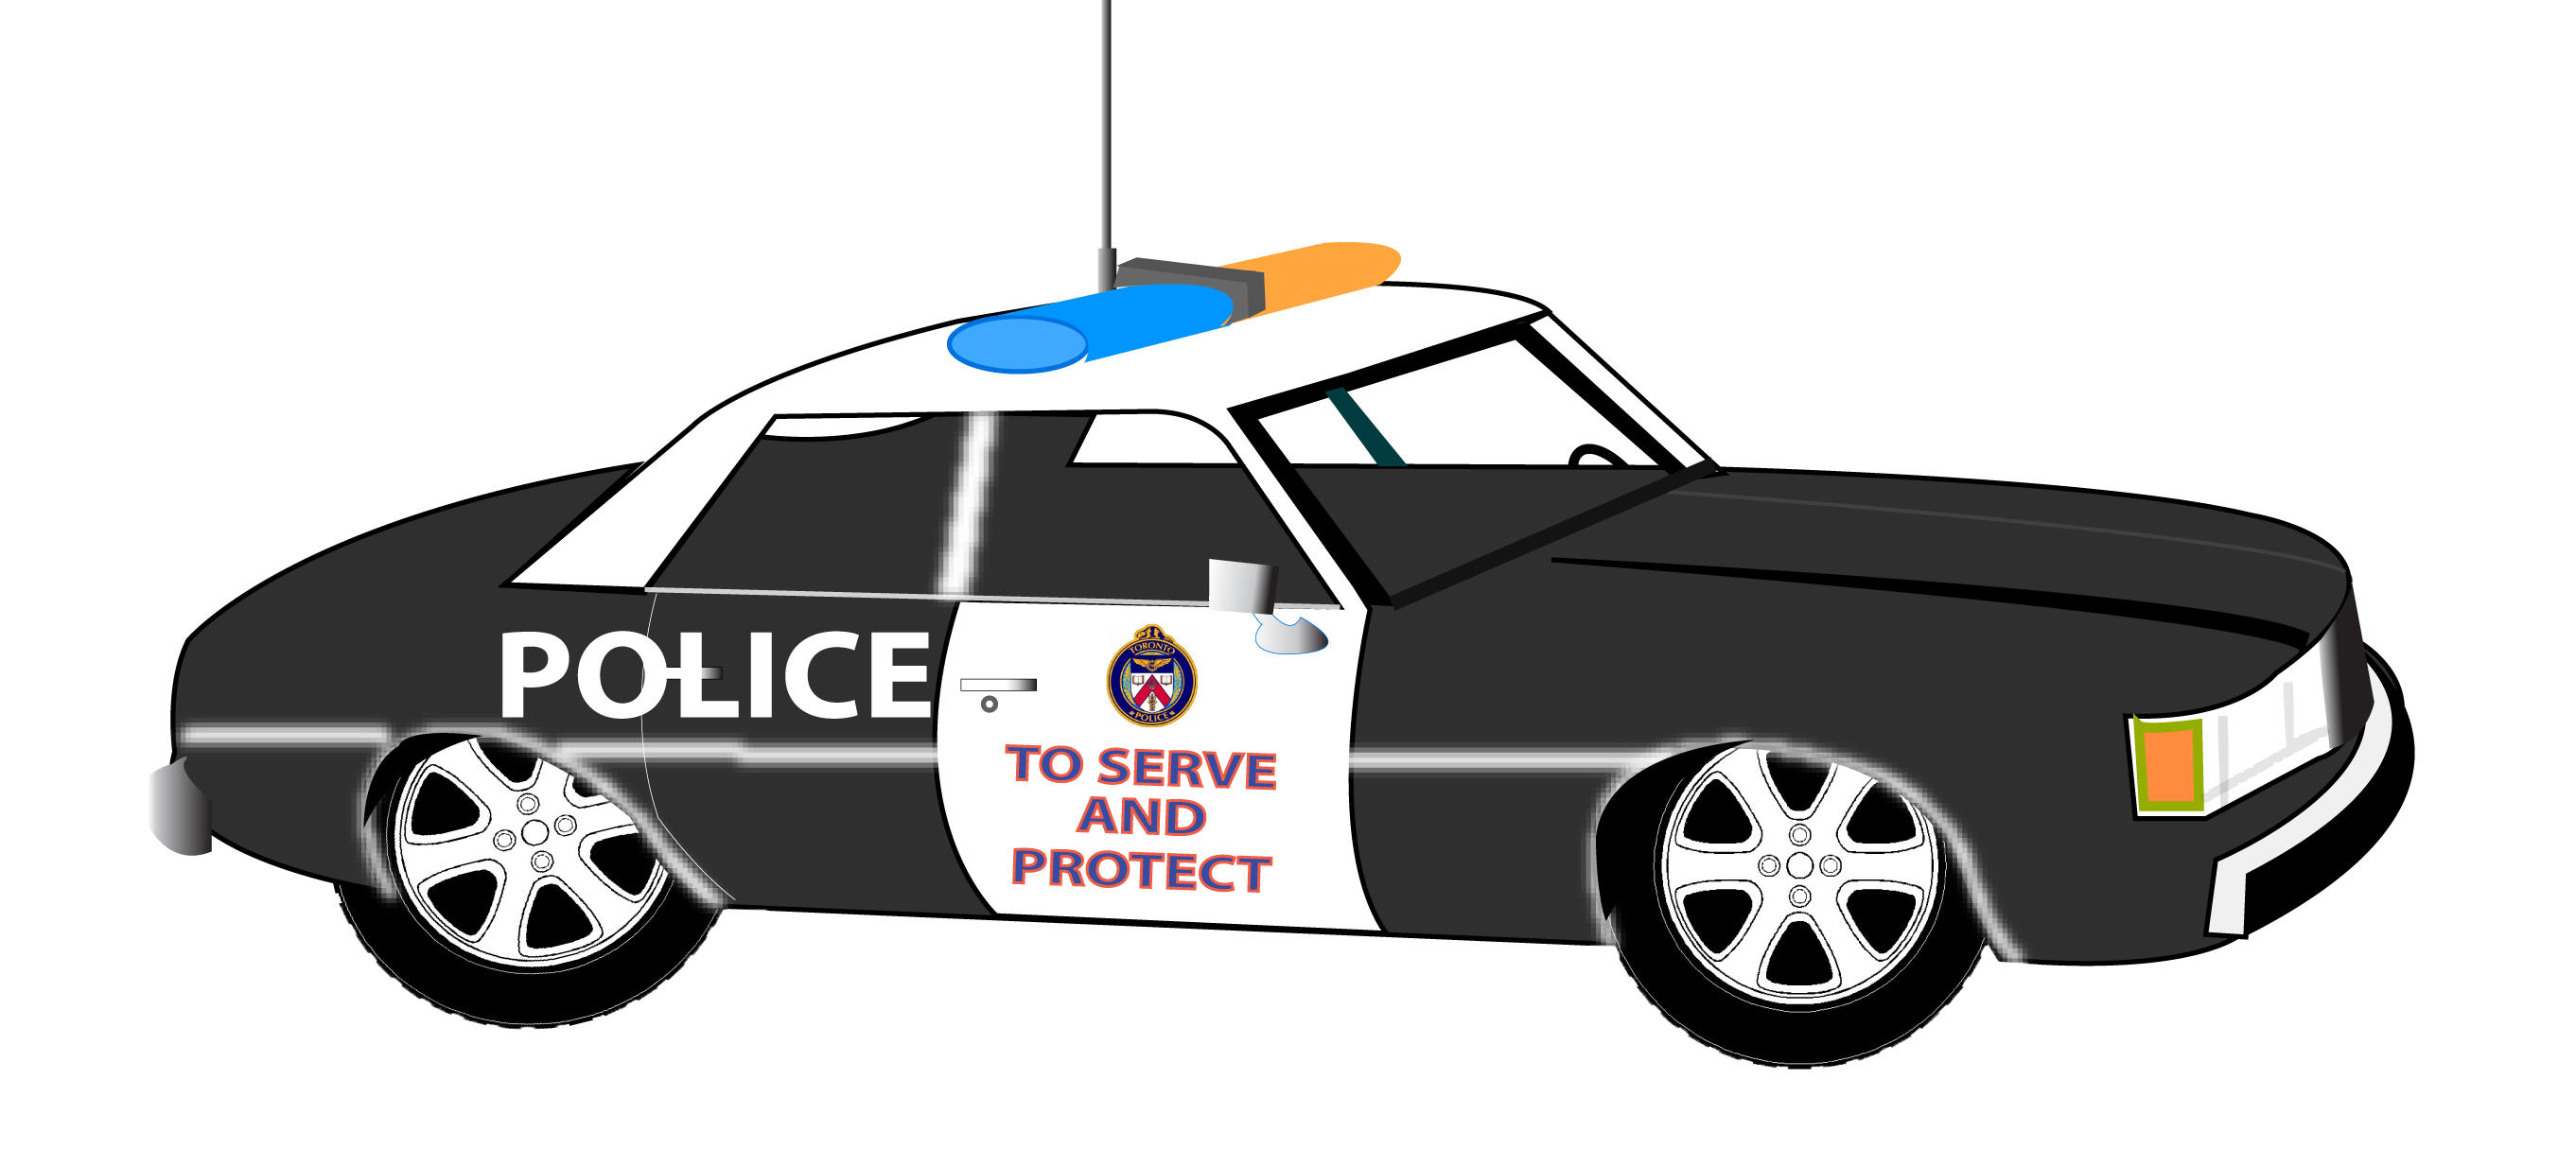 police car images clip art | Vehicle Pictures